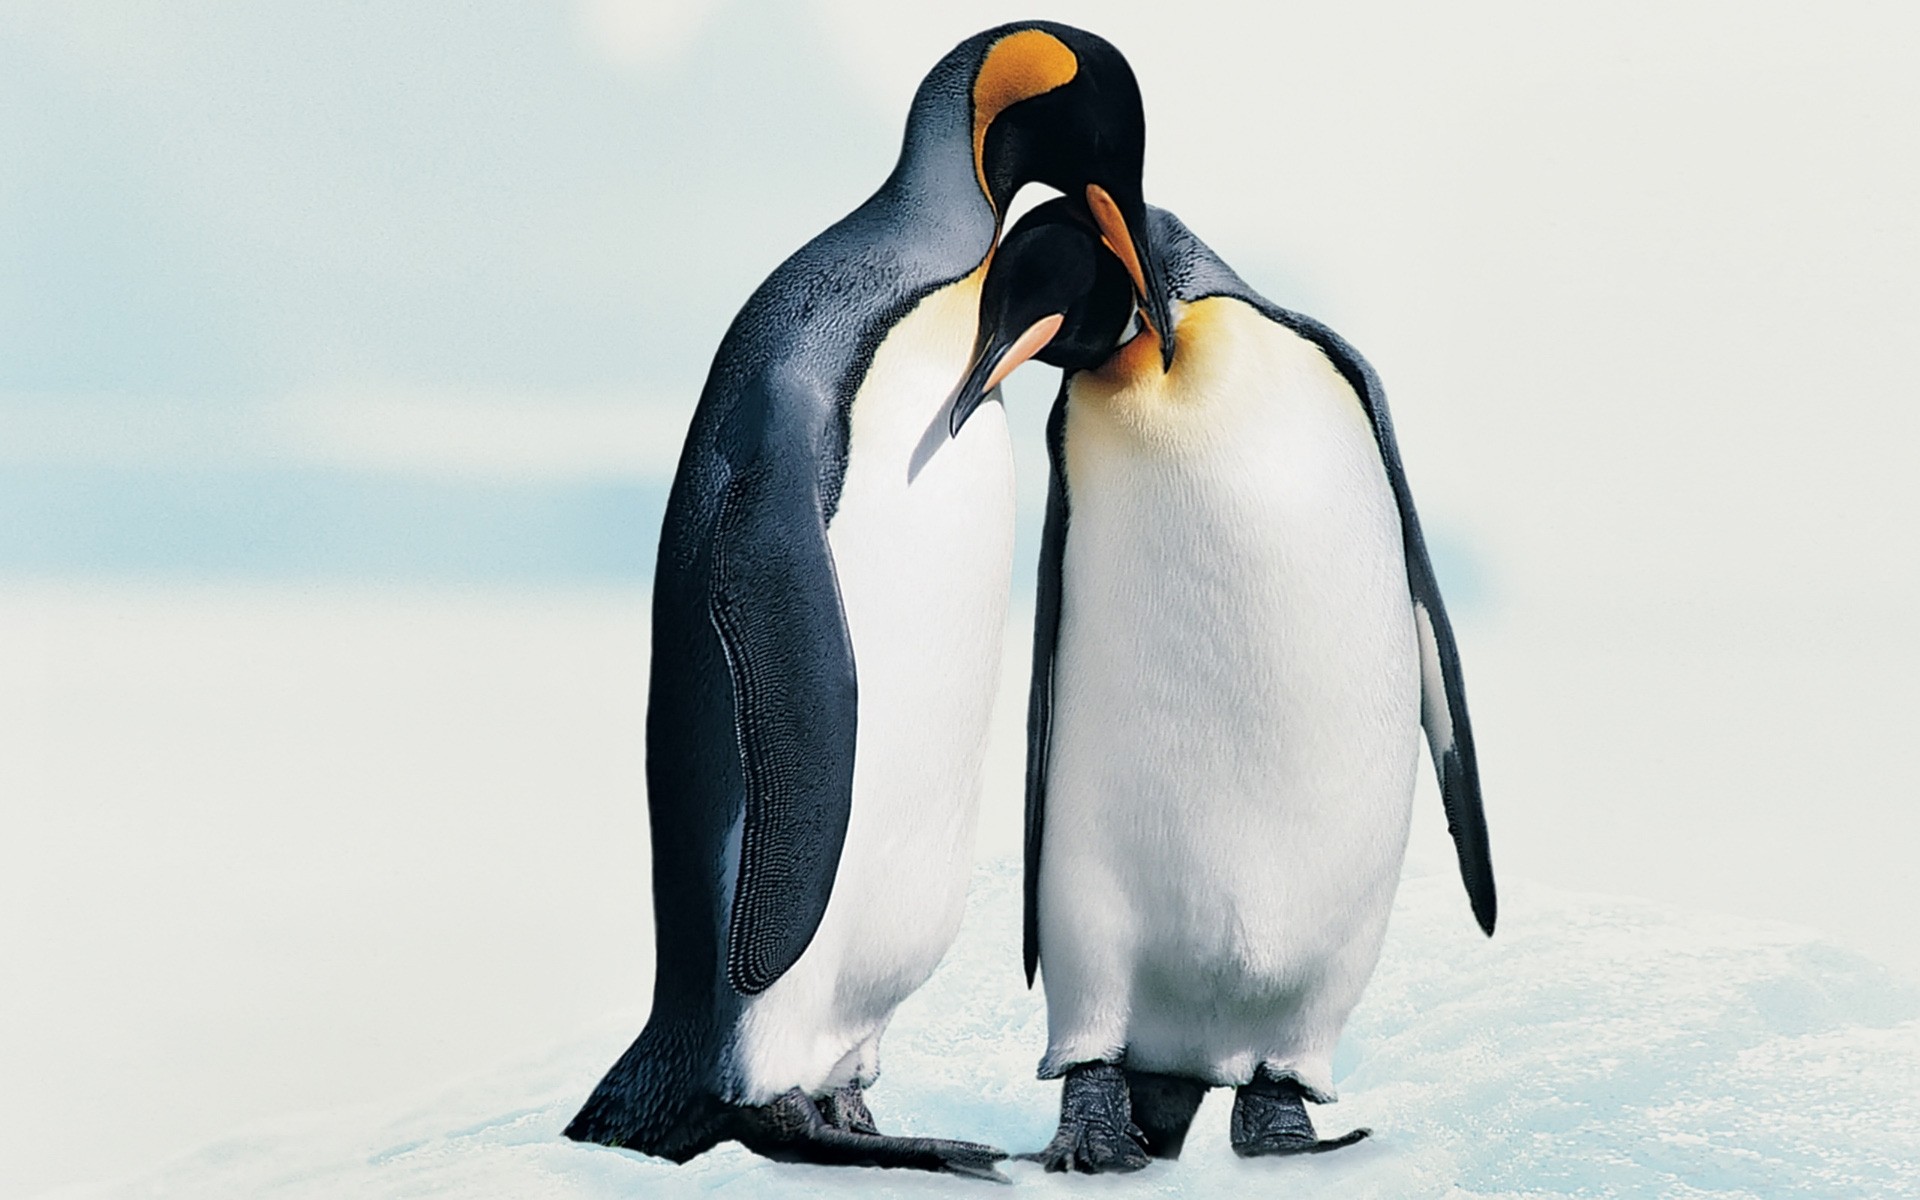 penguin bird snow winter frosty wildlife cold one ice two water outdoors ocean side view nature adult daylight animal sea